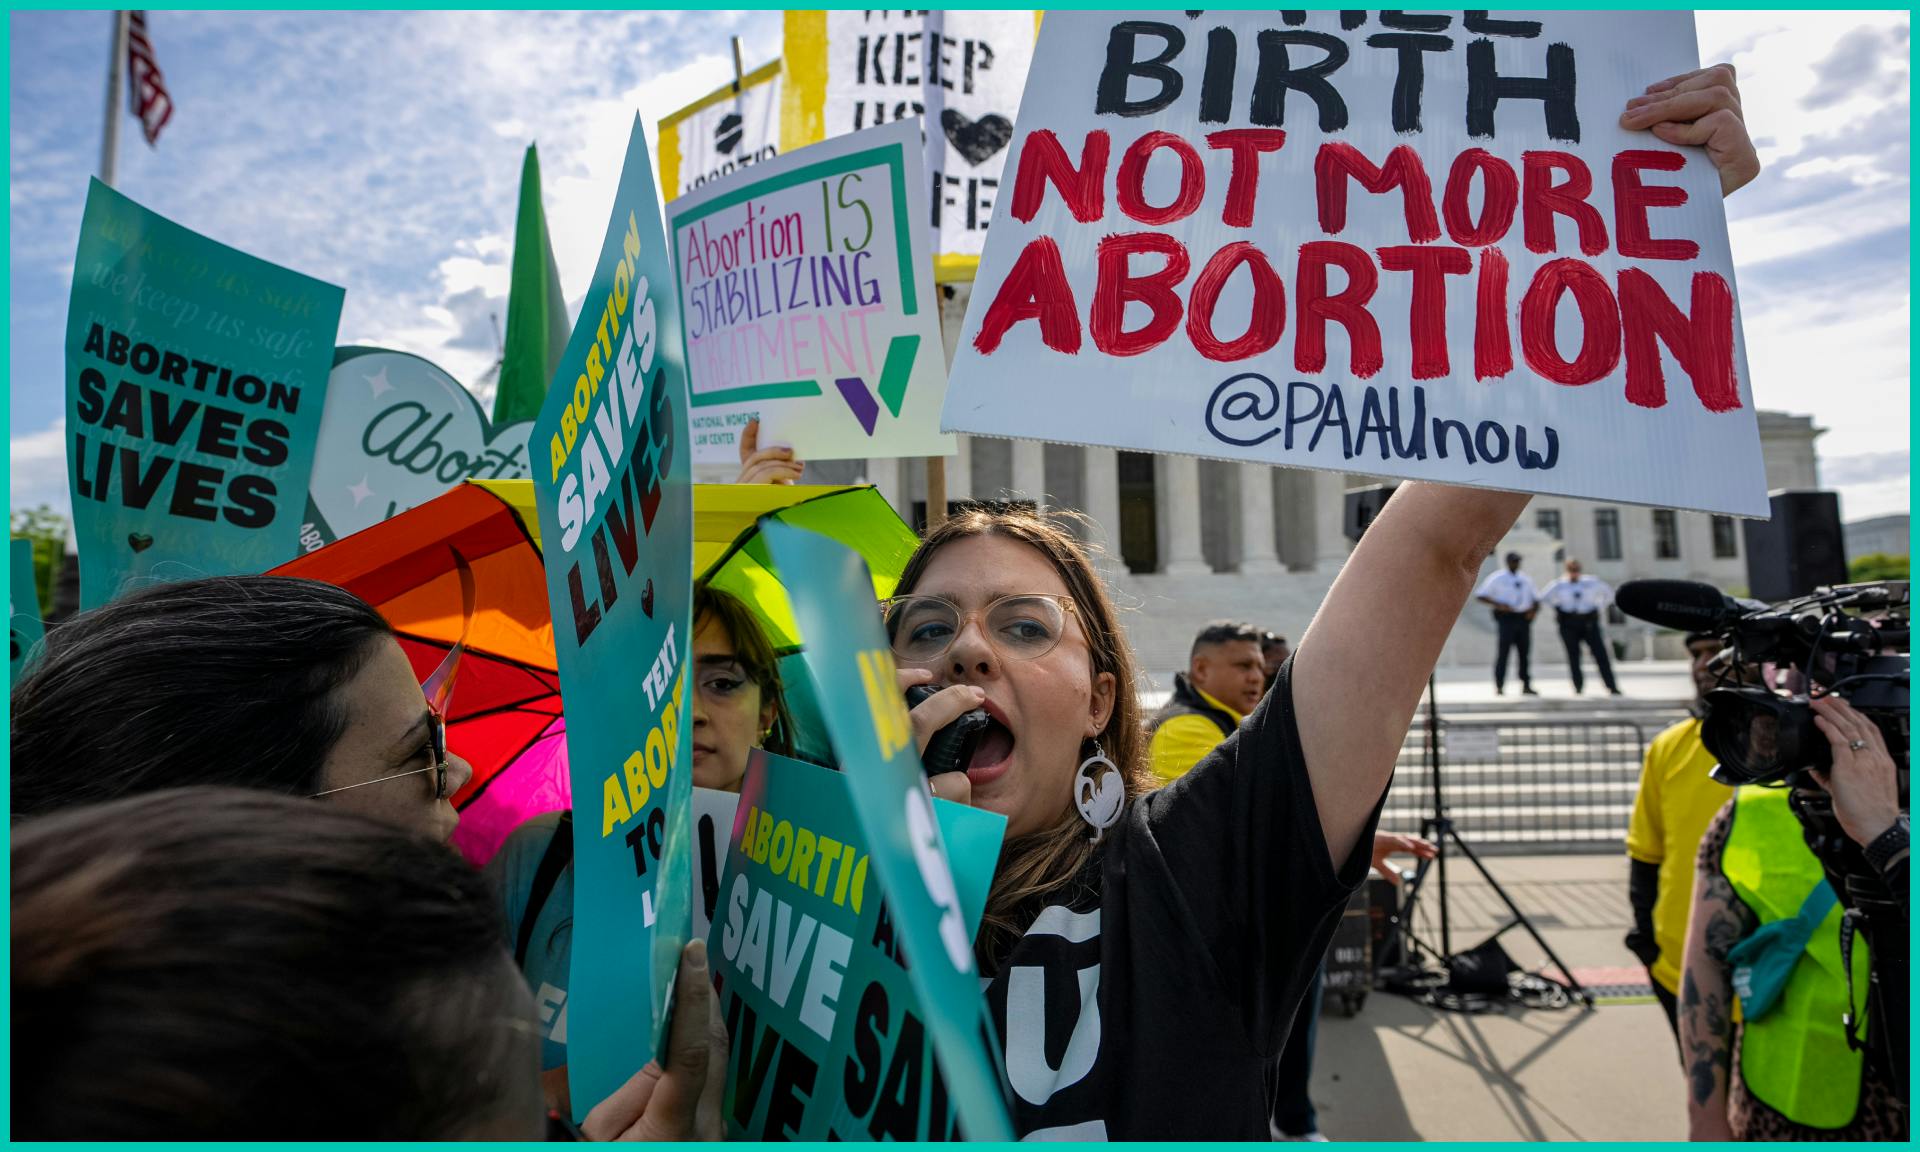 Abortion rights and anti-abortion supporters clash outside the Supreme Court